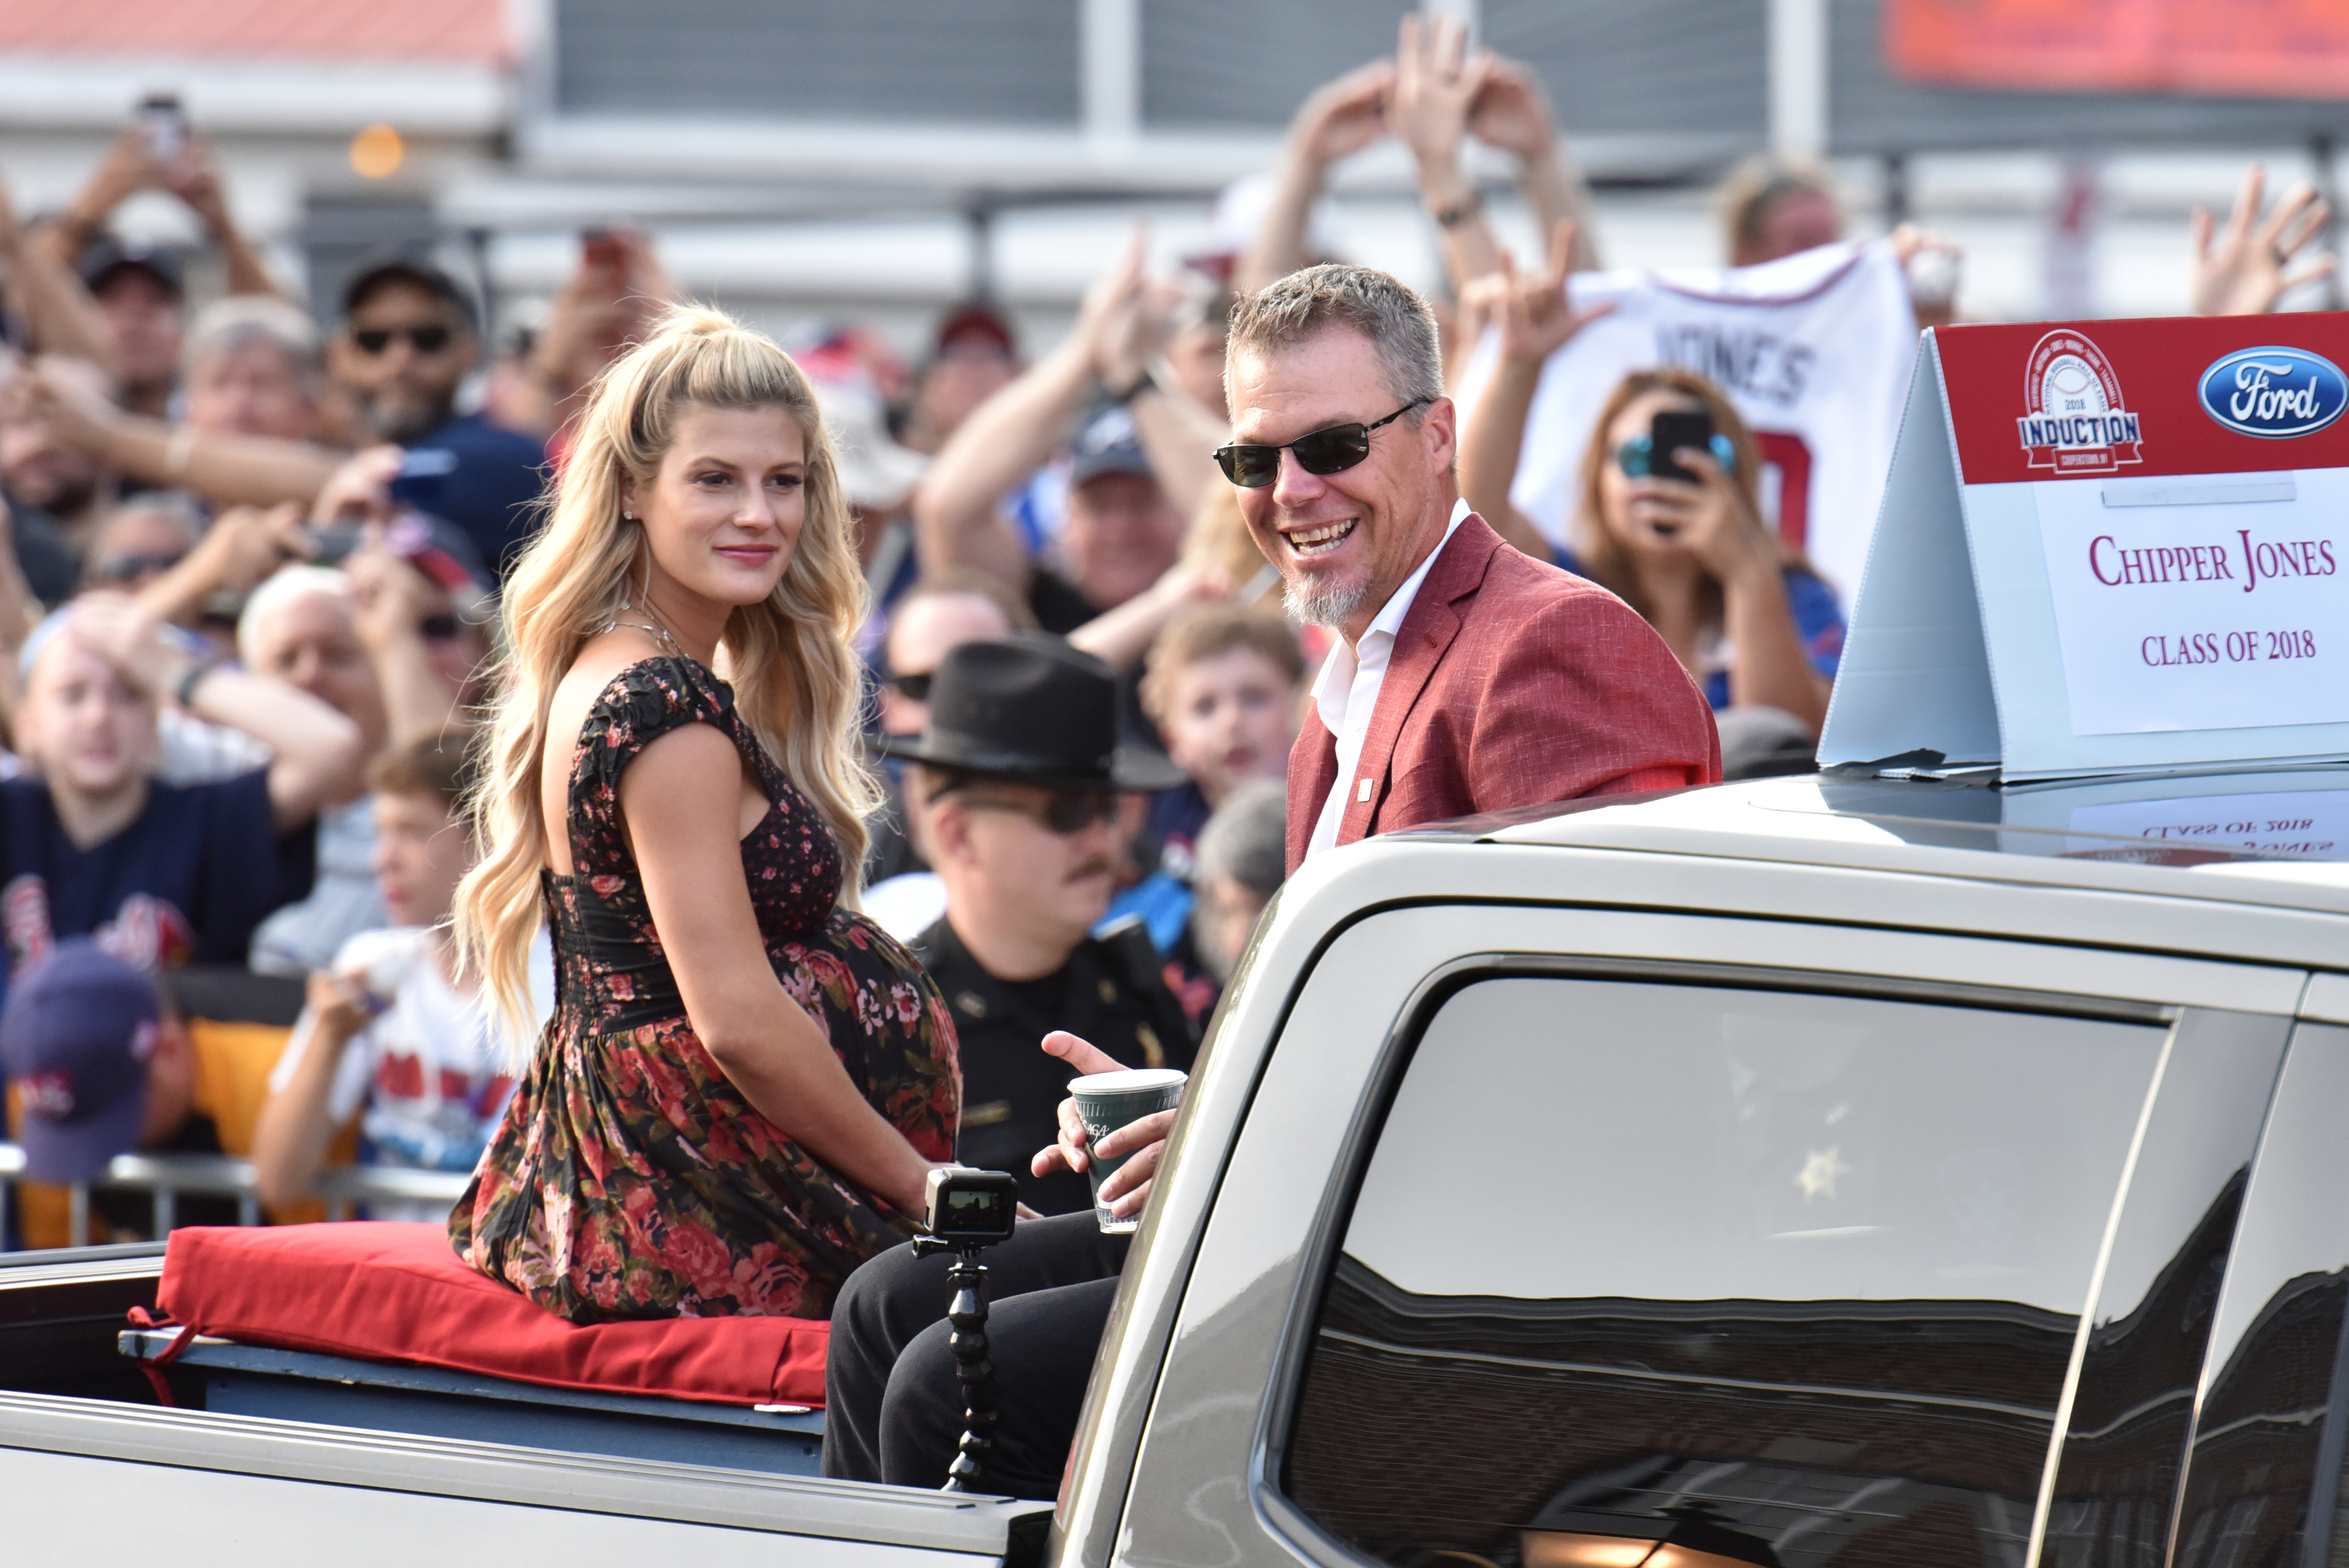 Here's to fans who share Chipper Jones' Hall of Fame moment